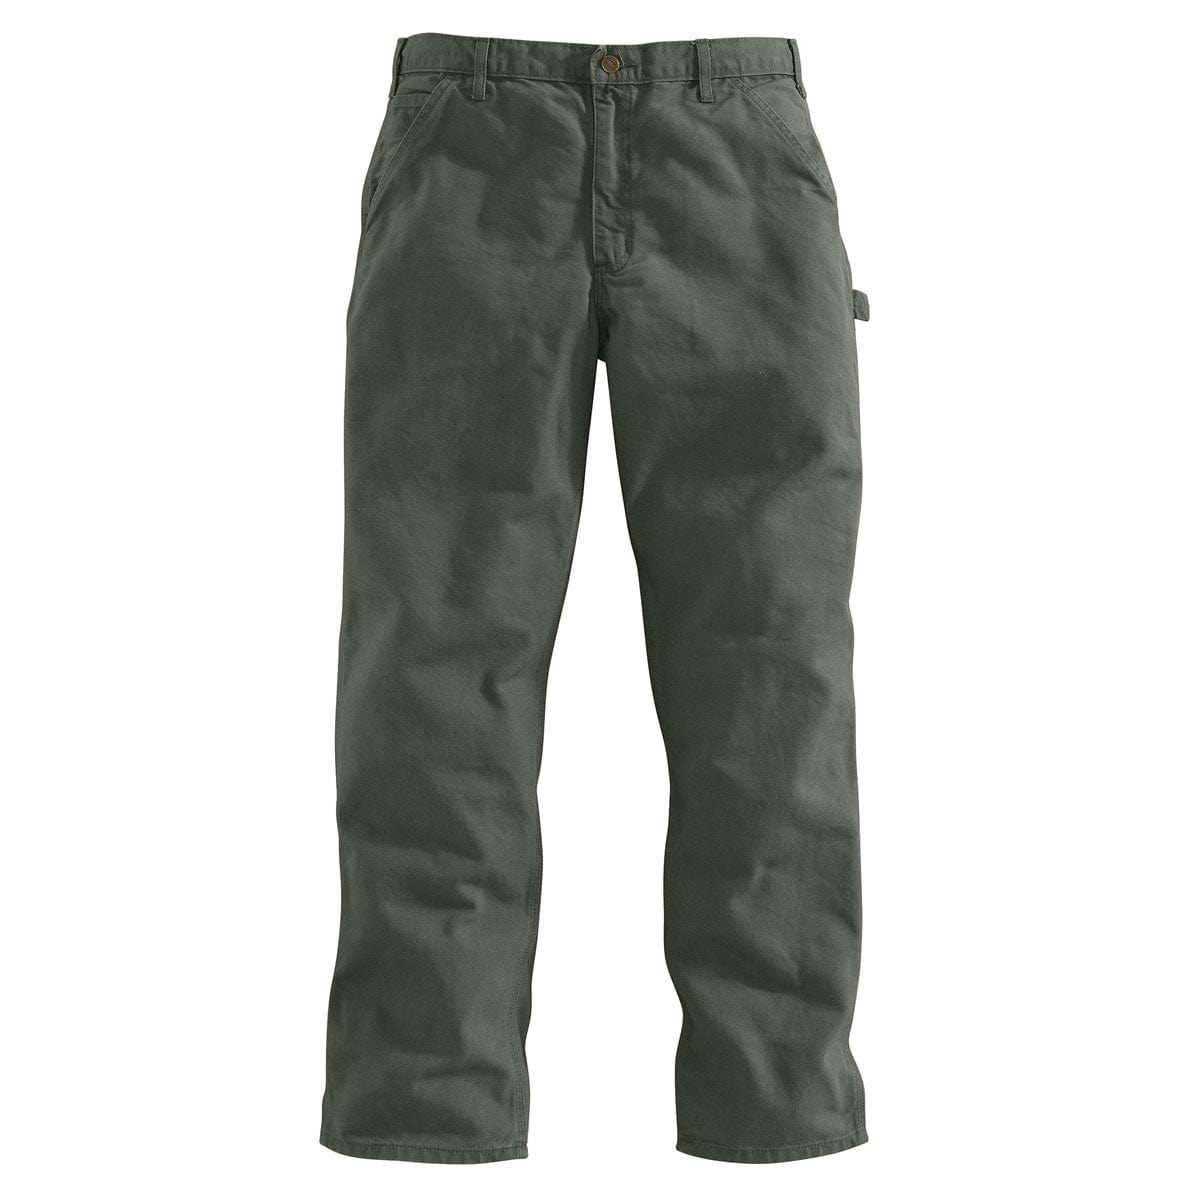 Carhartt Loose Fit Washed Duck Utility Work Pant, Waist Sizes 34"-38"